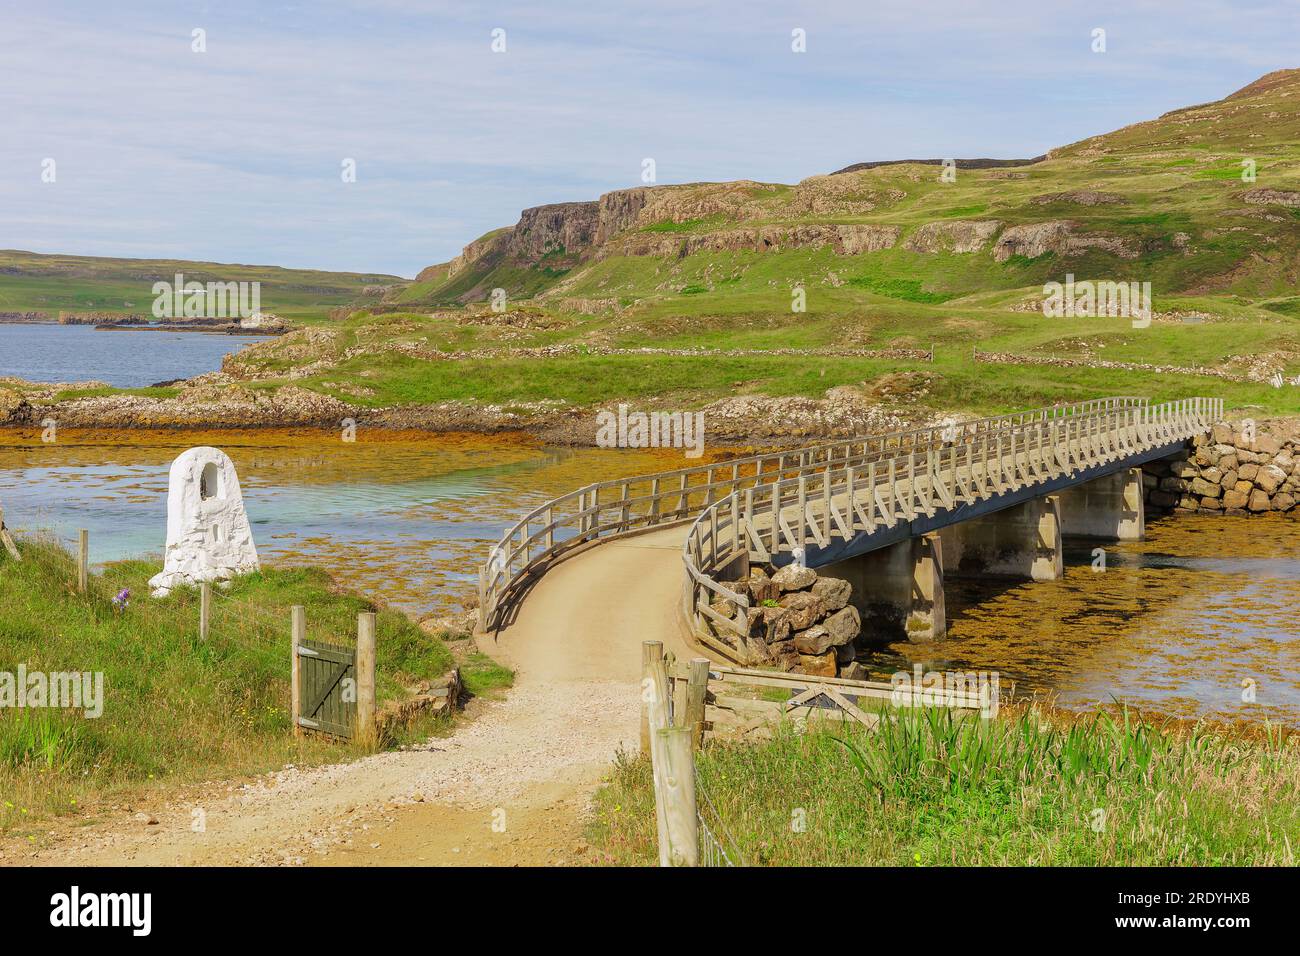 The new bridge which links the Isle of Canna to Sanday over a stretch of water with white monument and path leading to Traigh Bhan, a white, sandy bea Stock Photo